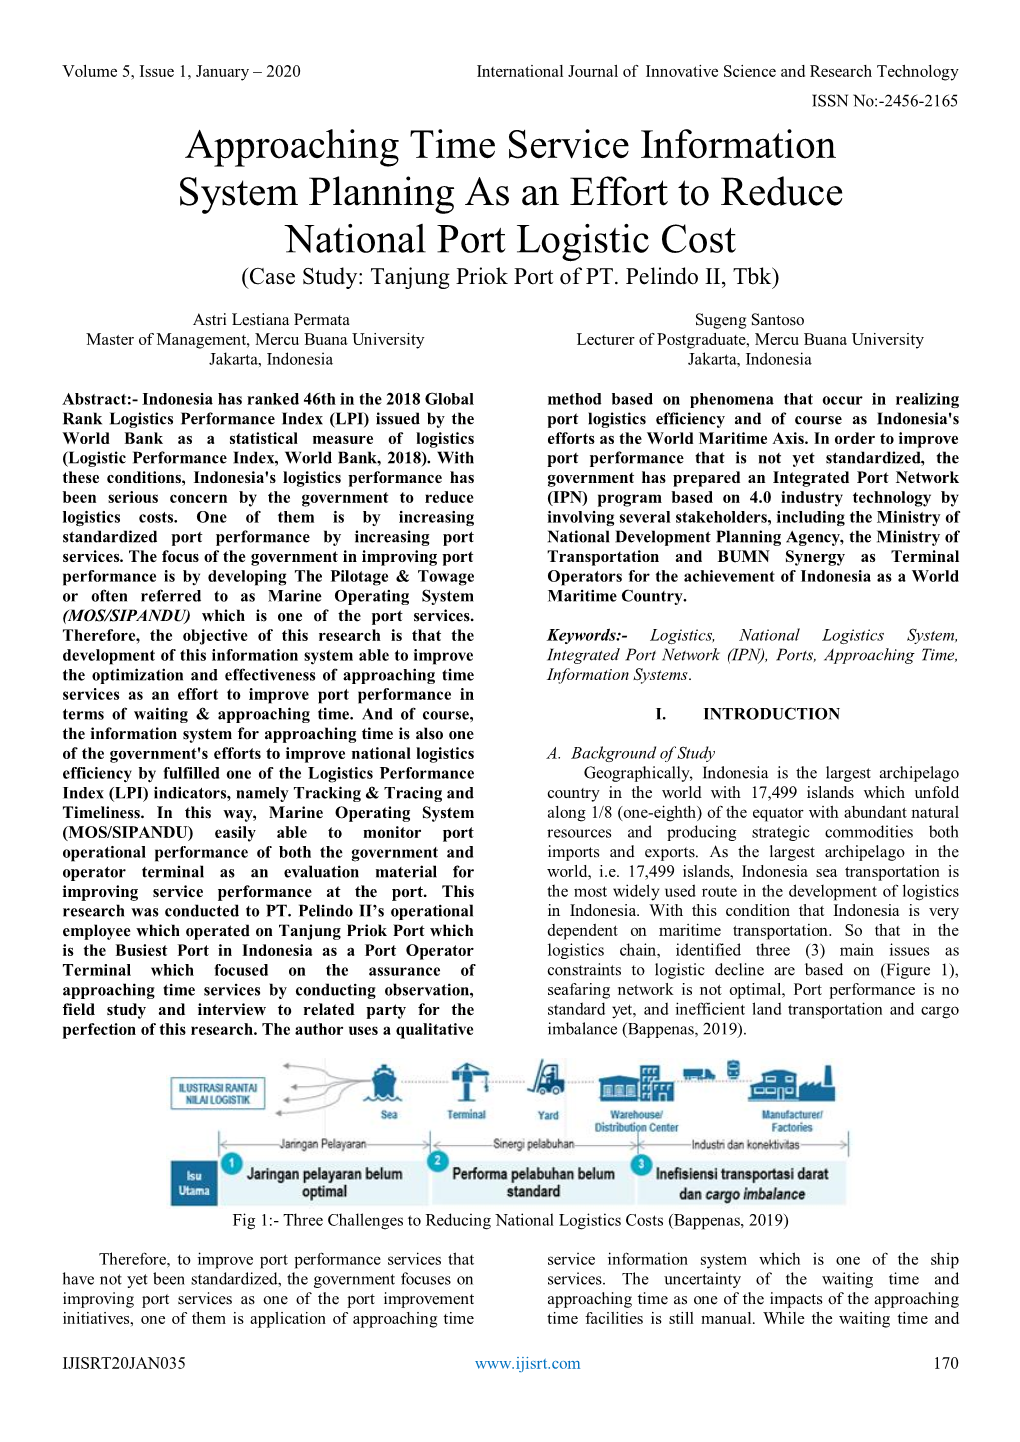 Approaching Time Service Information System Planning As an Effort to Reduce National Port Logistic Cost (Case Study: Tanjung Priok Port of PT